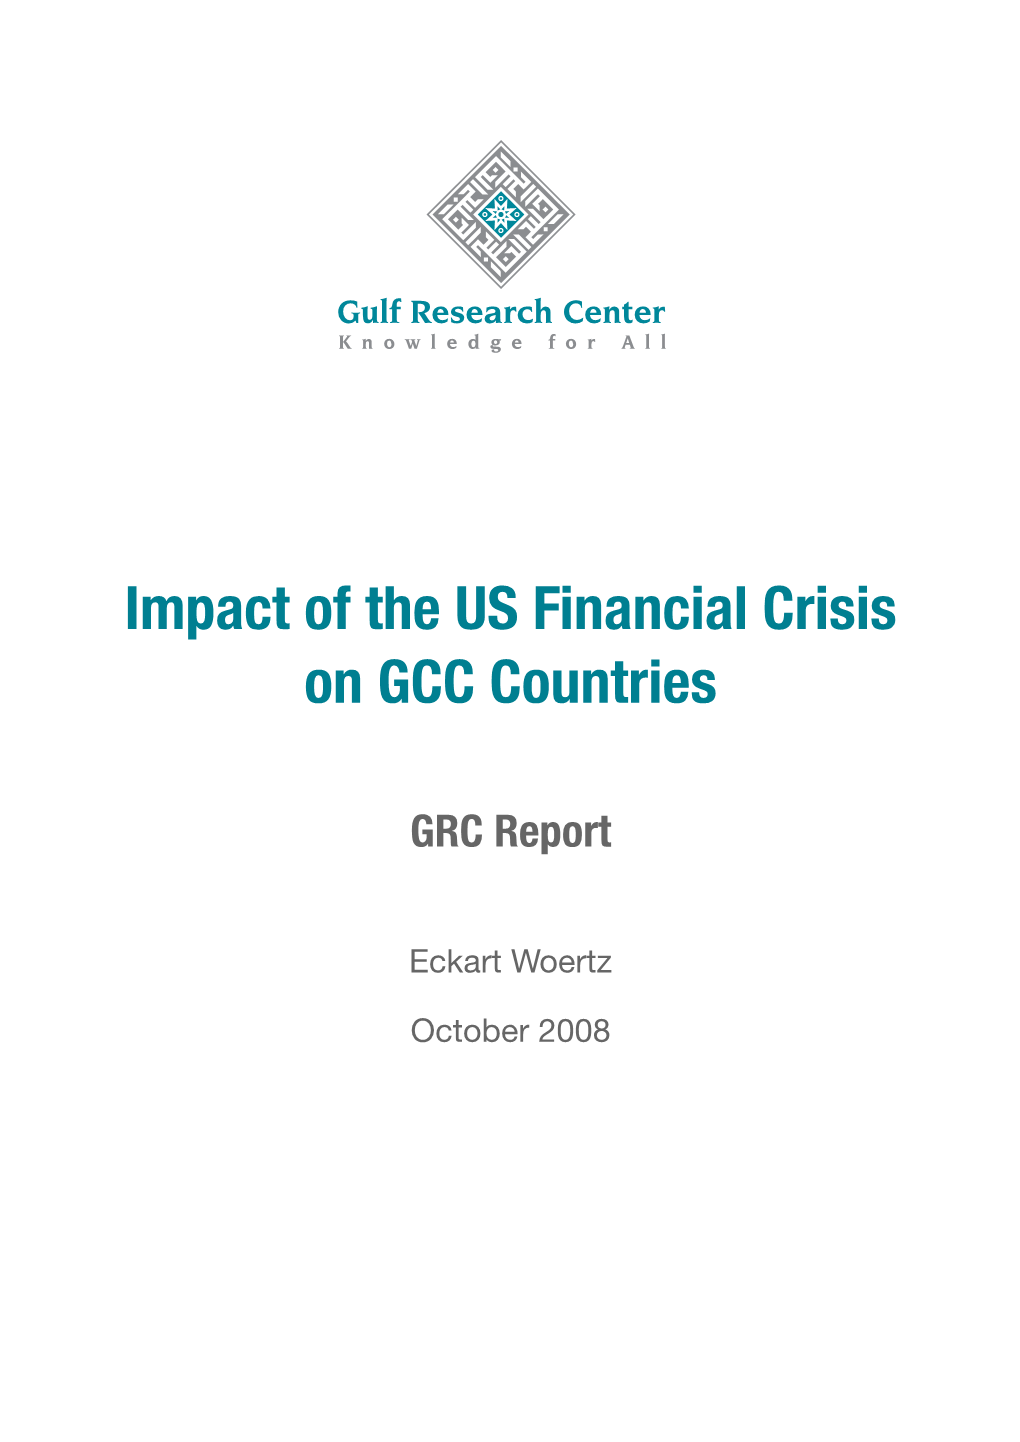 Impact of the US Financial Crisis on GCC Countries